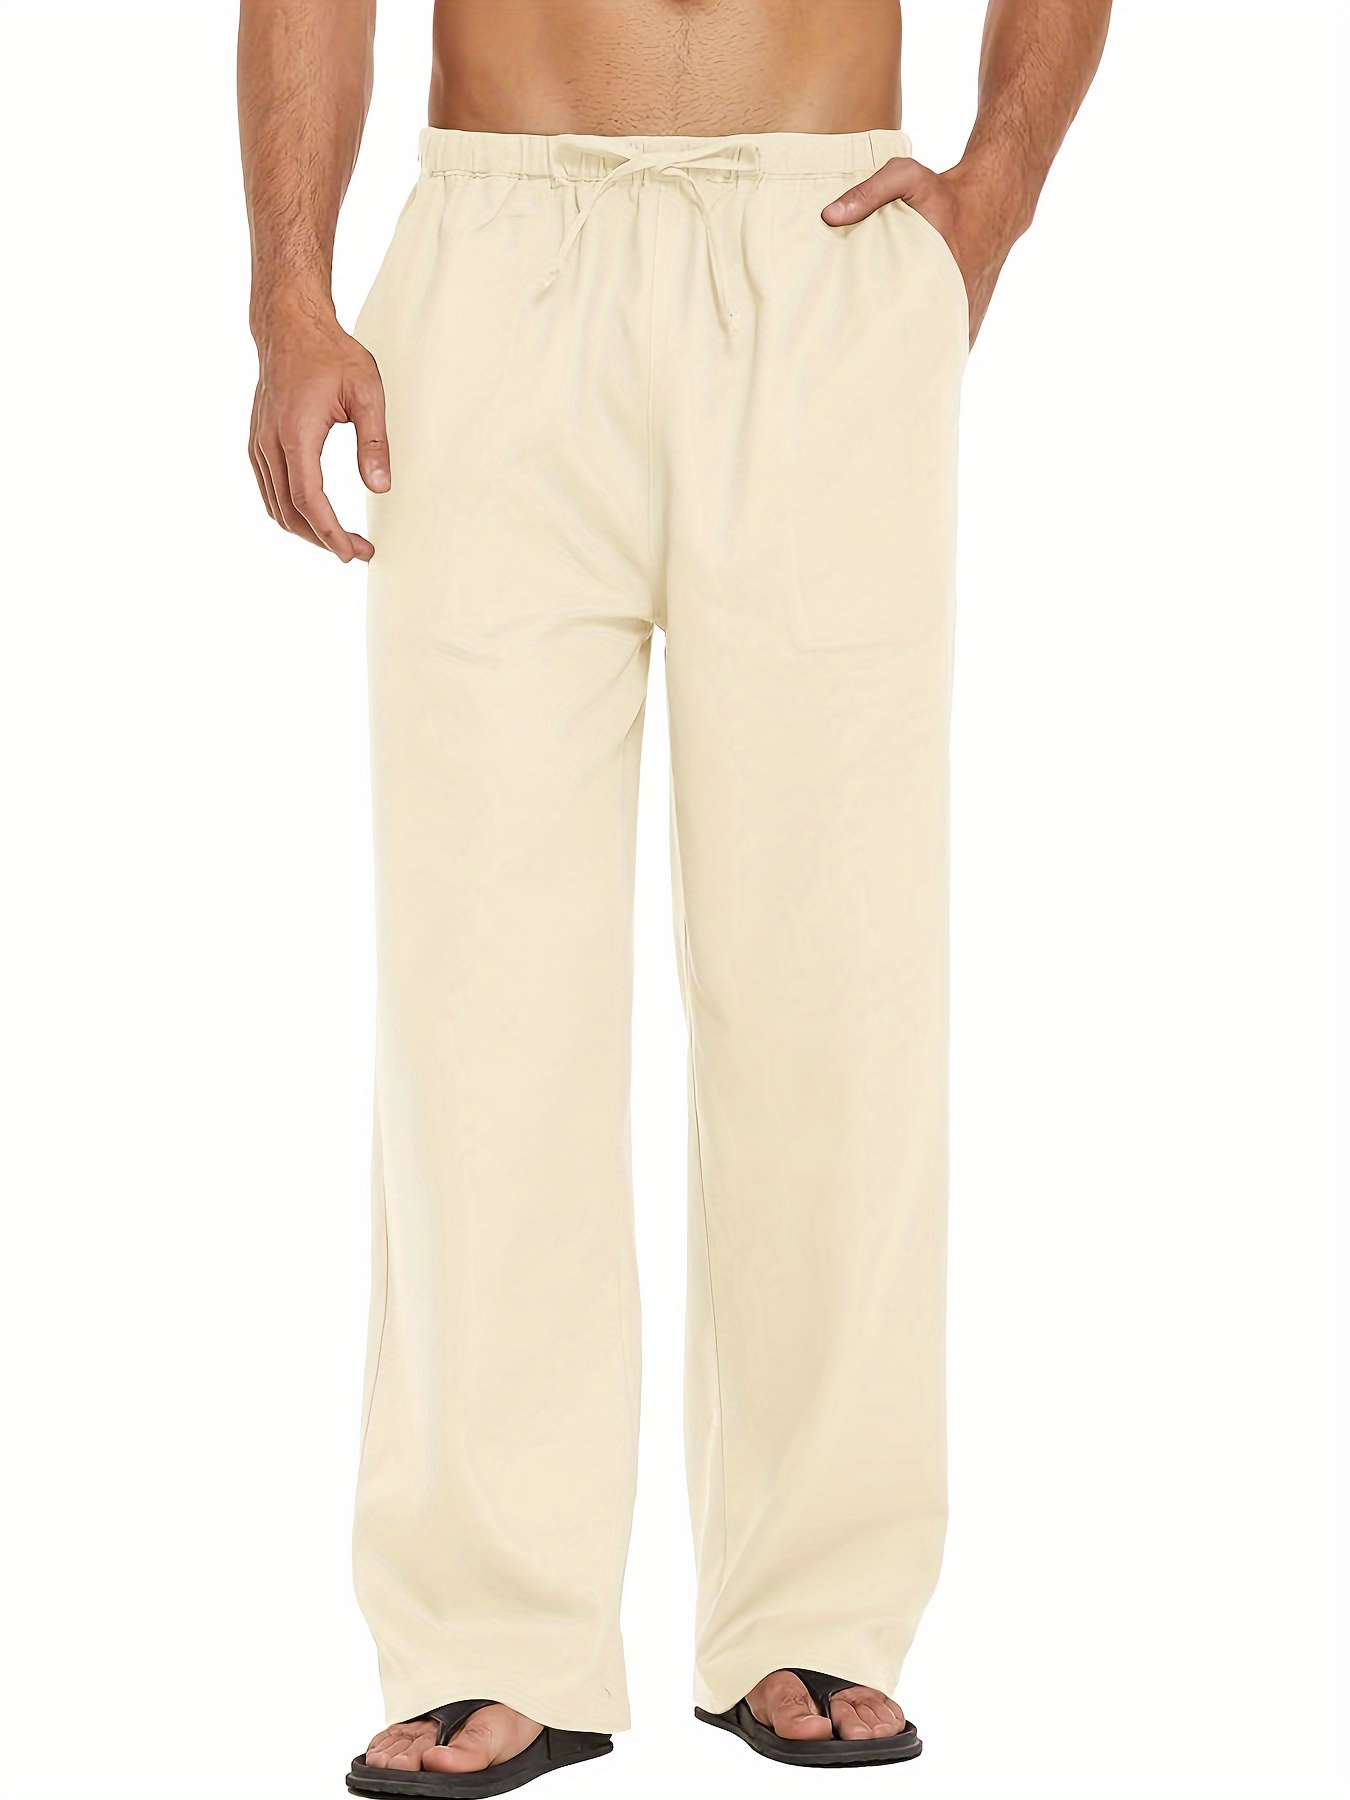 LOOSE-FIITING DRAWSTRING TROUSERS - Beige